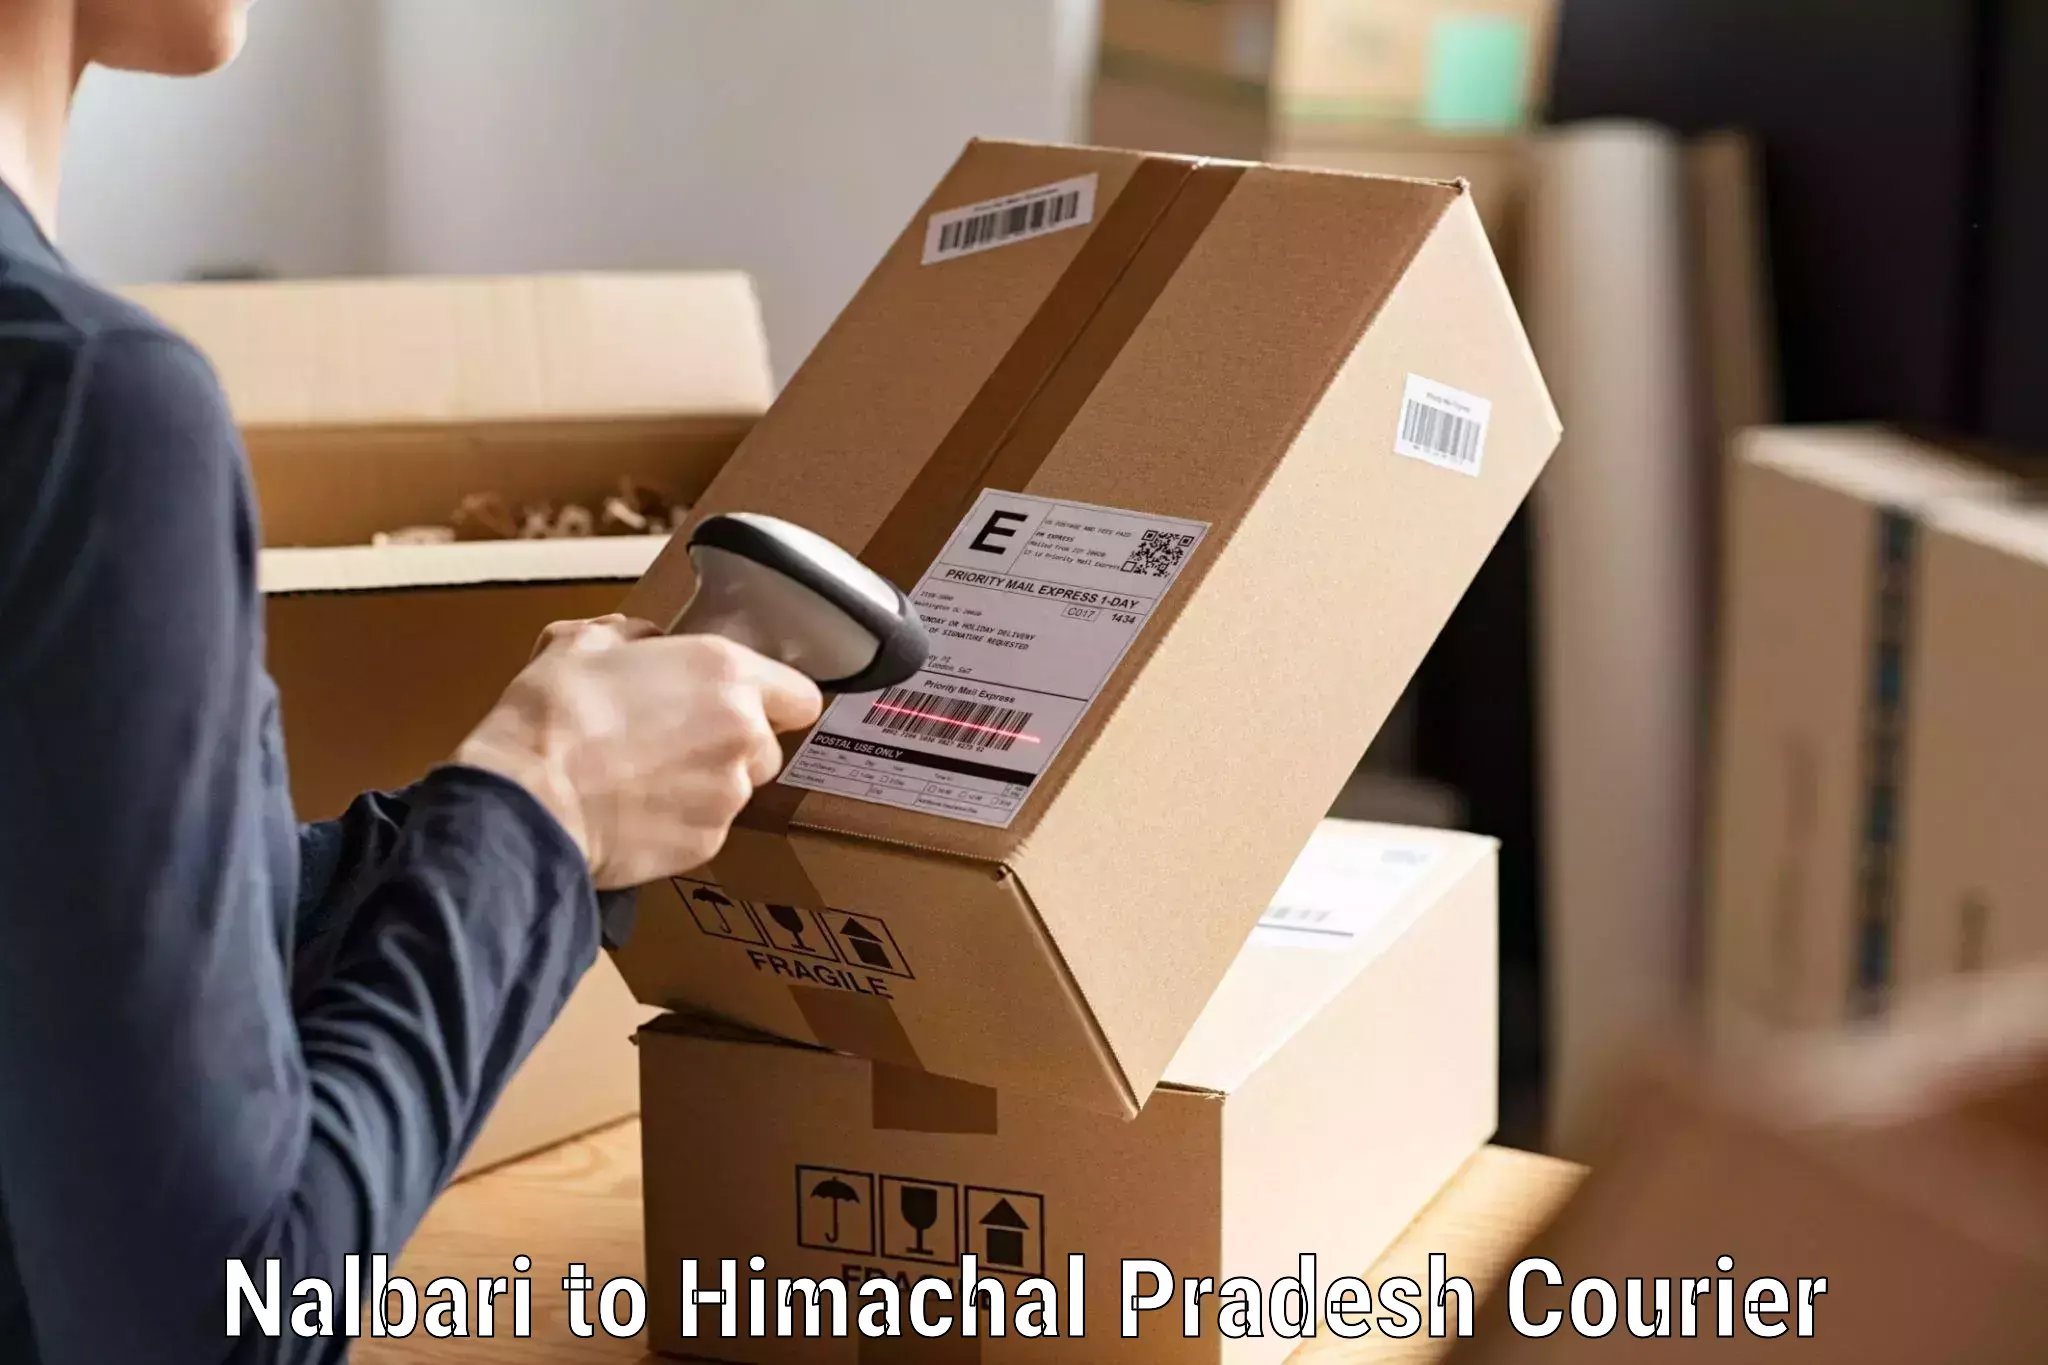 Easy access courier services in Nalbari to Himachal Pradesh